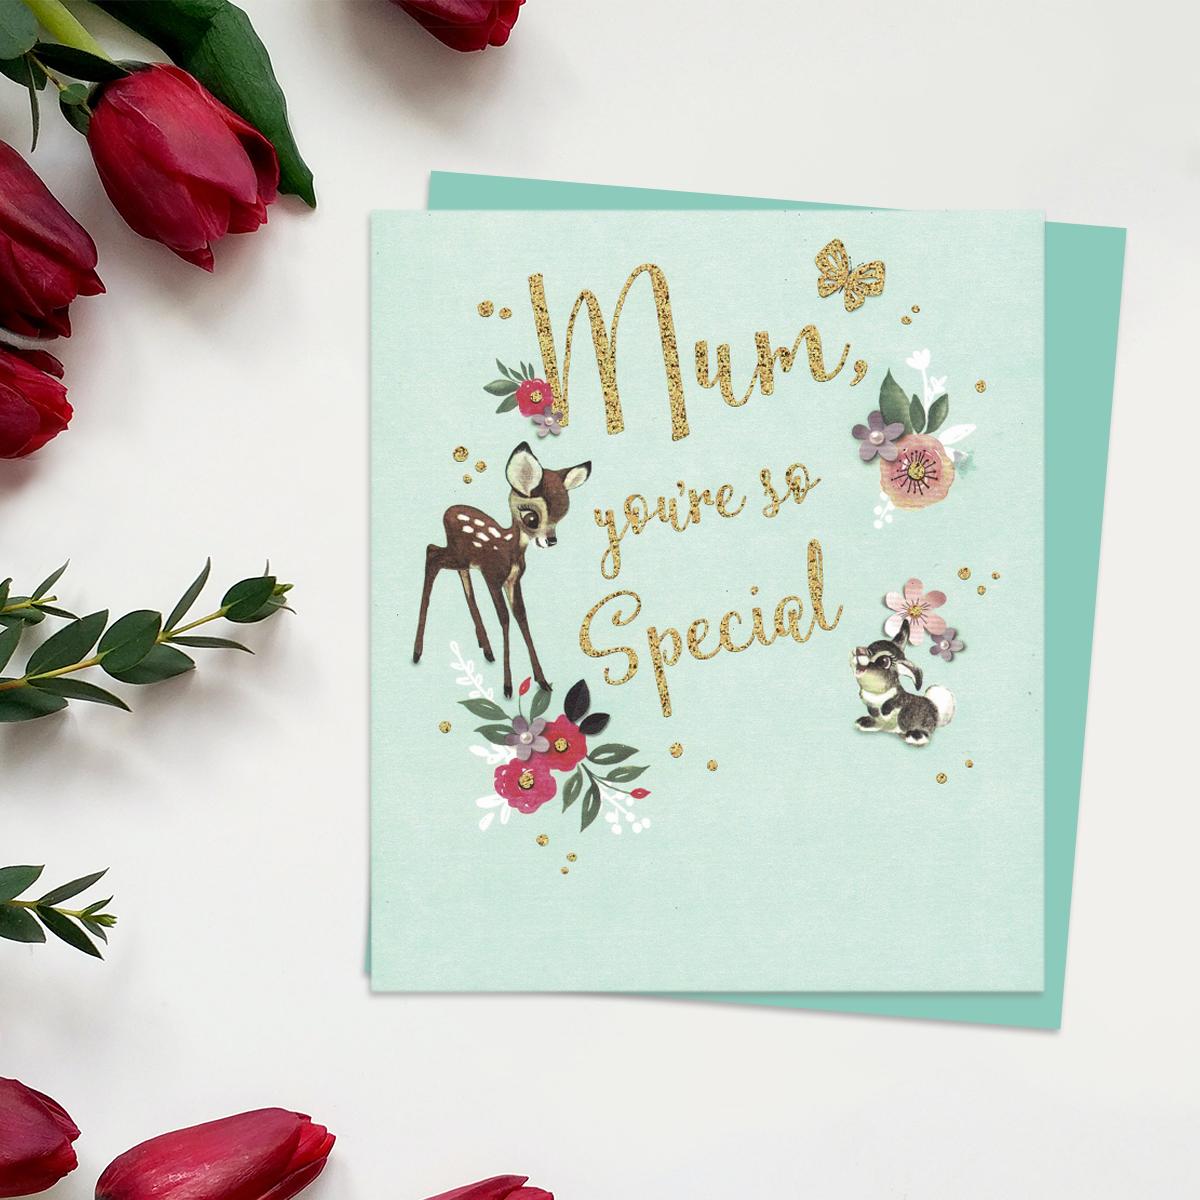 ' Mum You're So Special ' Disney Mother's Day Card Featuring Bambi and Thumper With Added Gold Foil Detail.